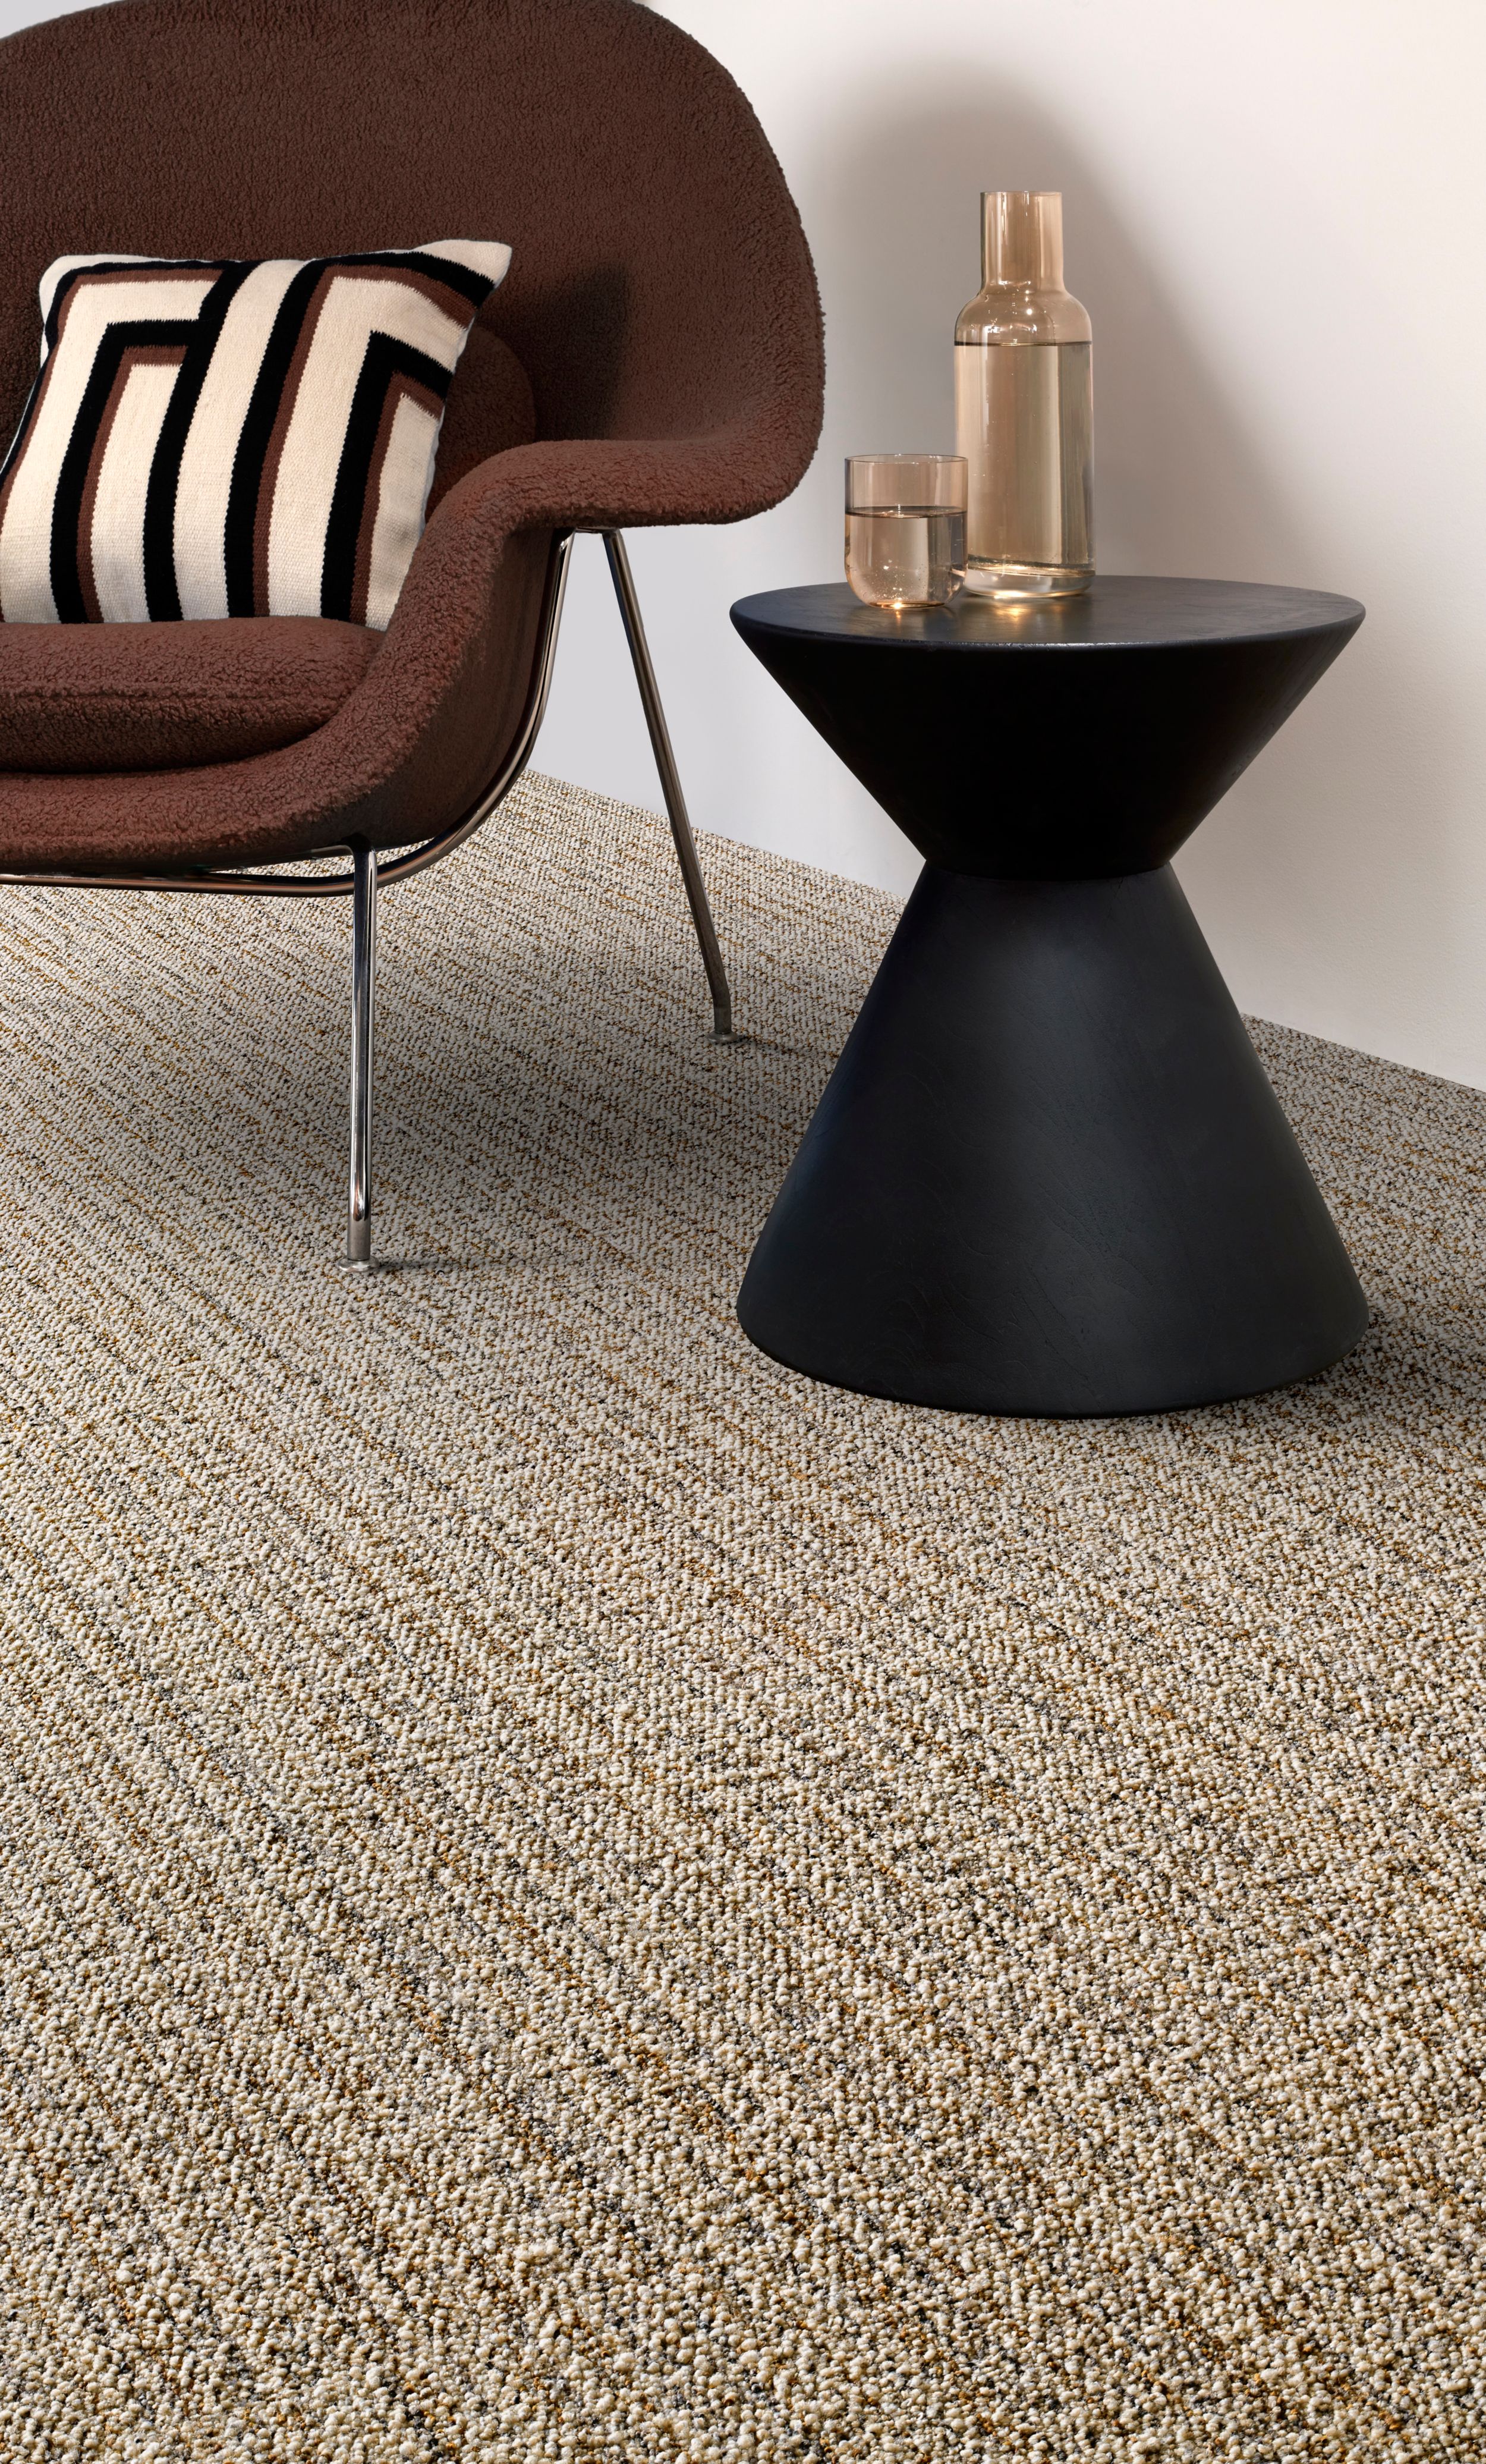 Interface E616 plank carpet tile in corporate lobby or private office image number 2